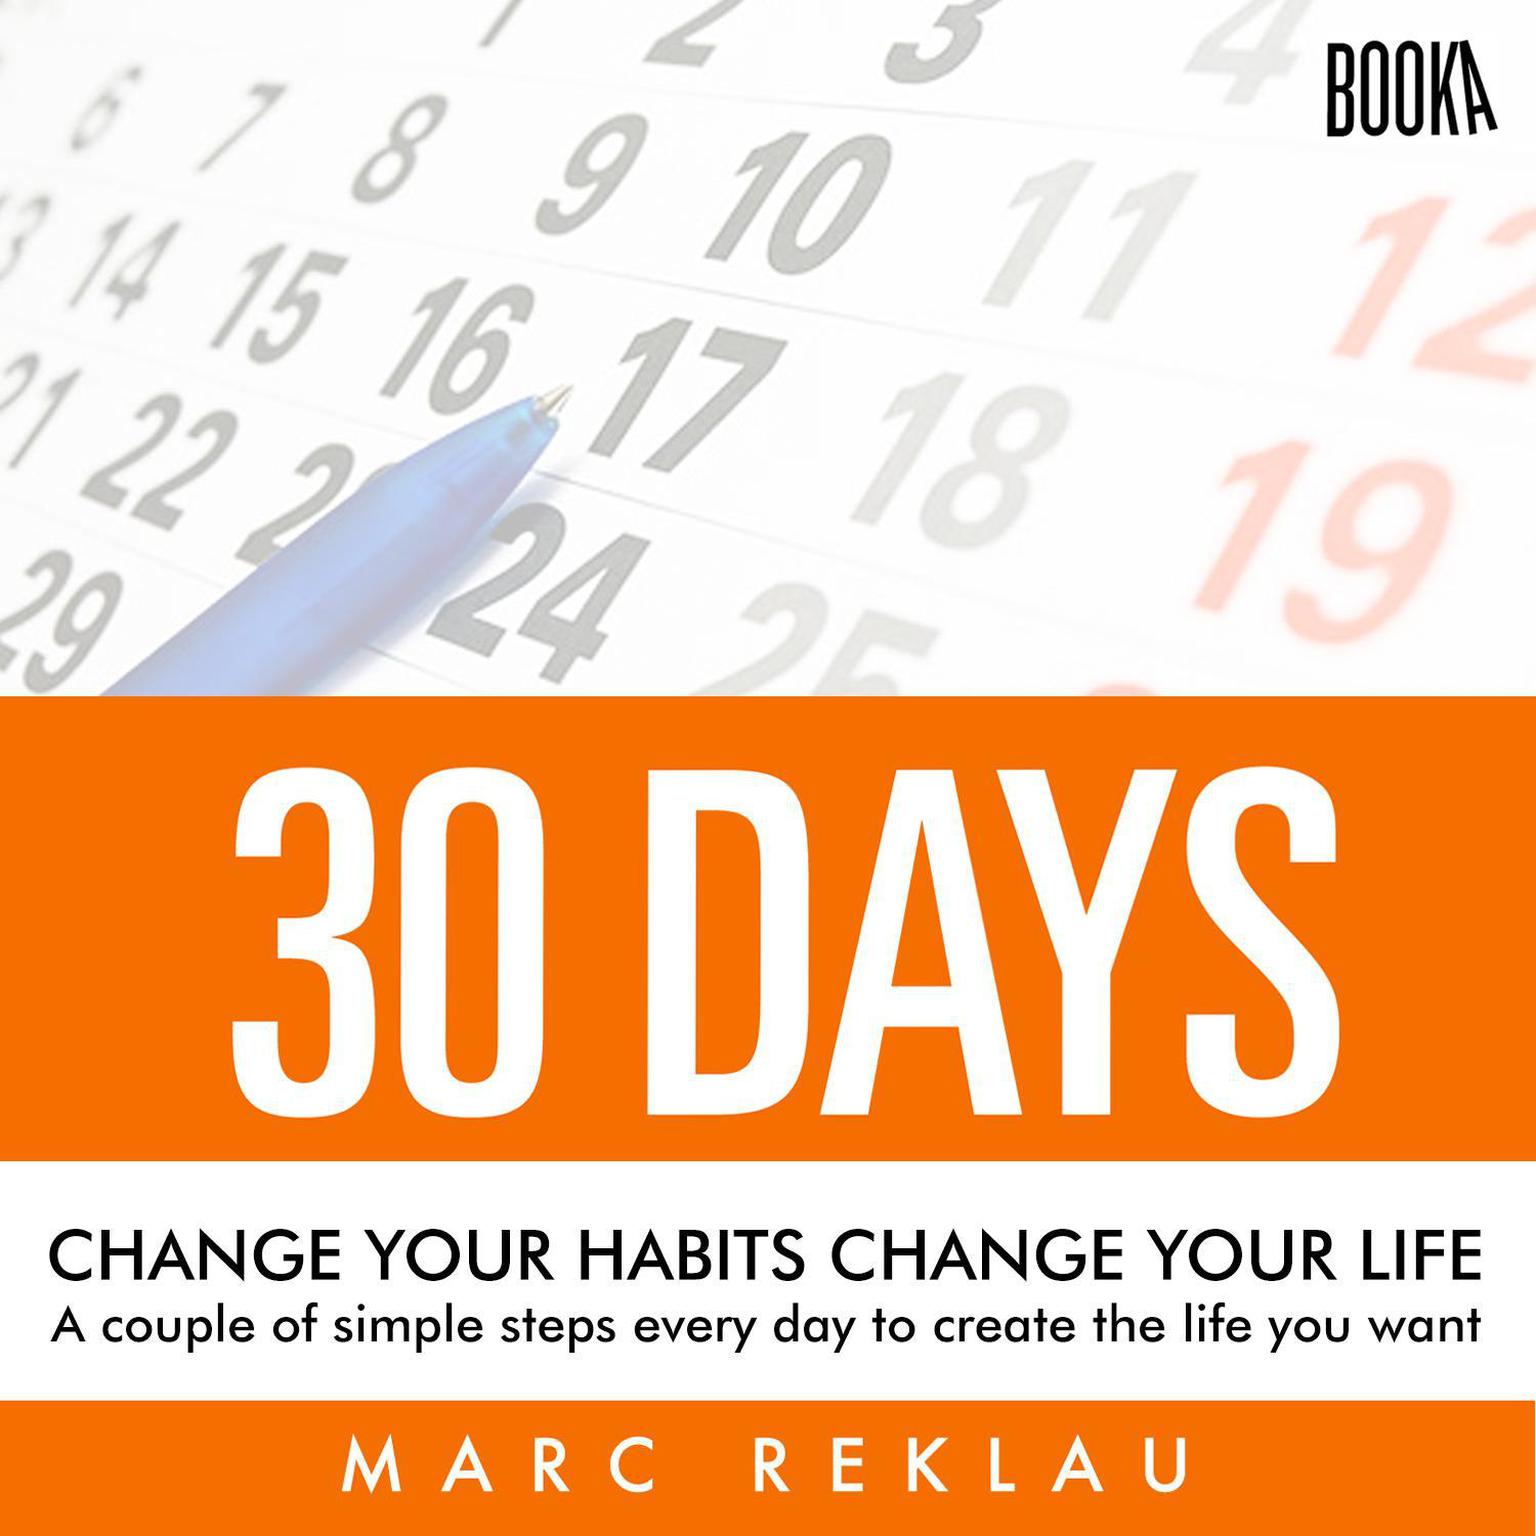 30 Days - Change your habits, Change your life: A couple of simple steps every day to create the life you want Audiobook, by Marc Reklau